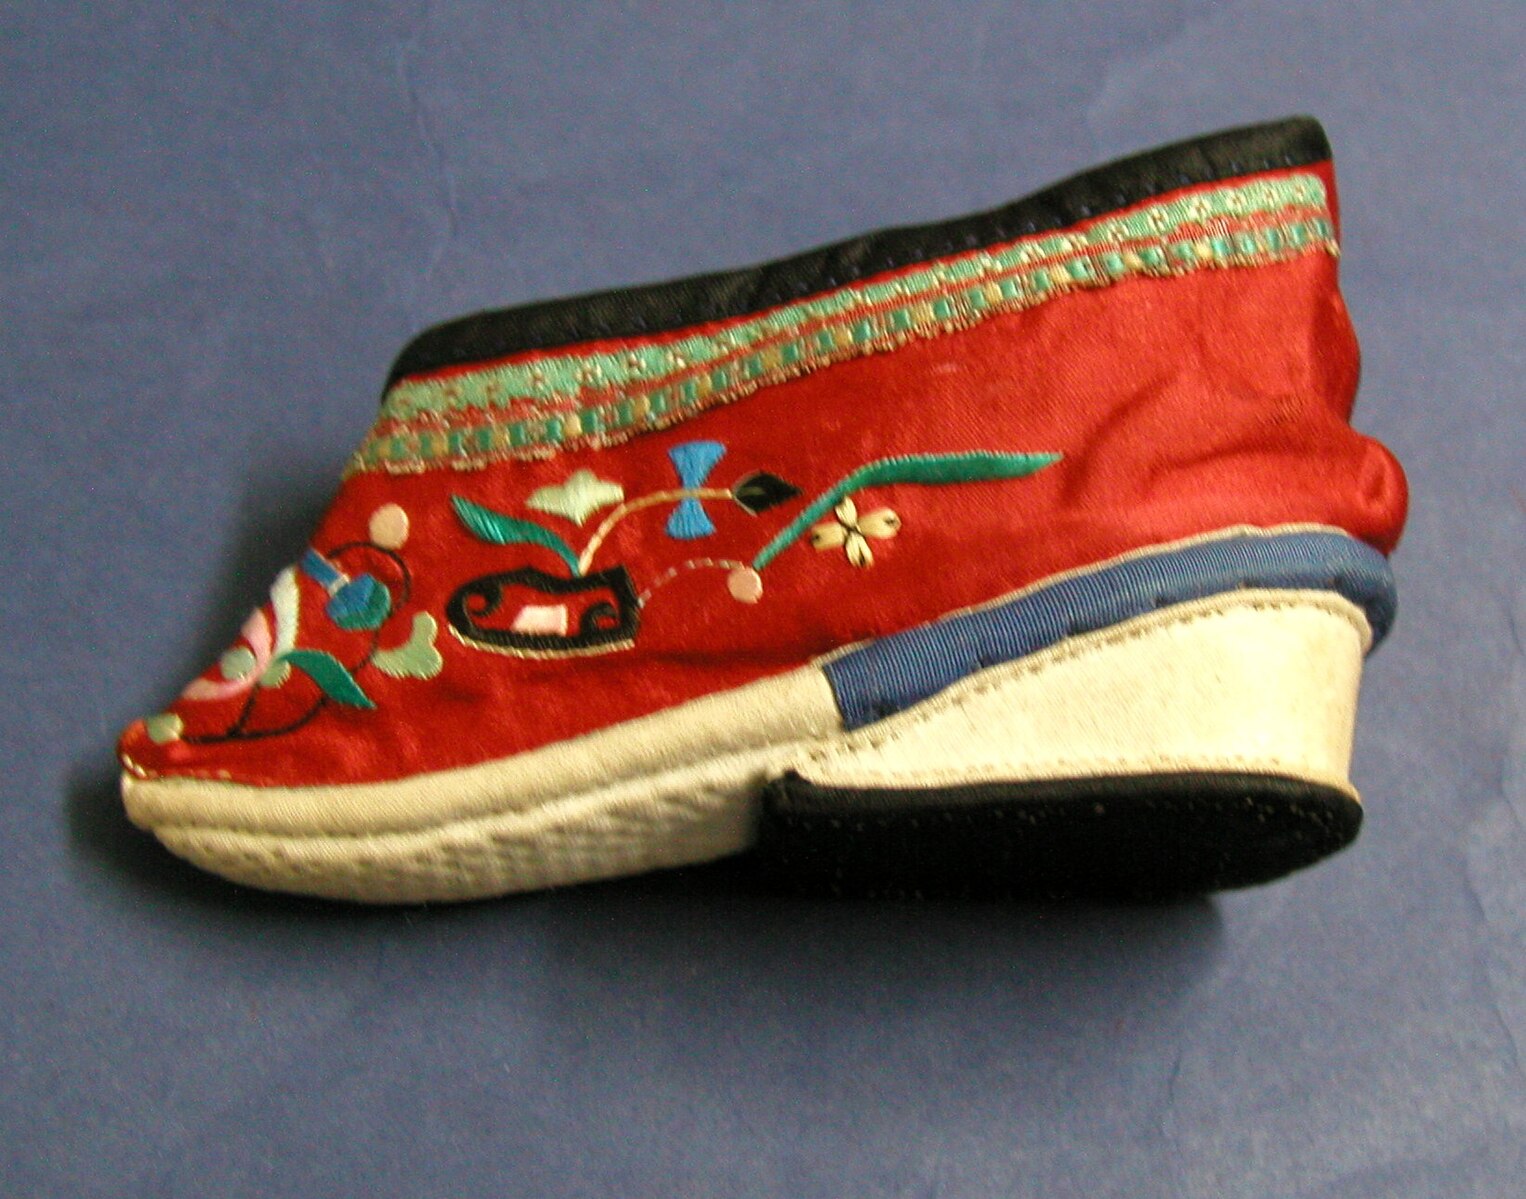 The Painful Legacy of the Tradition of Foot Binding